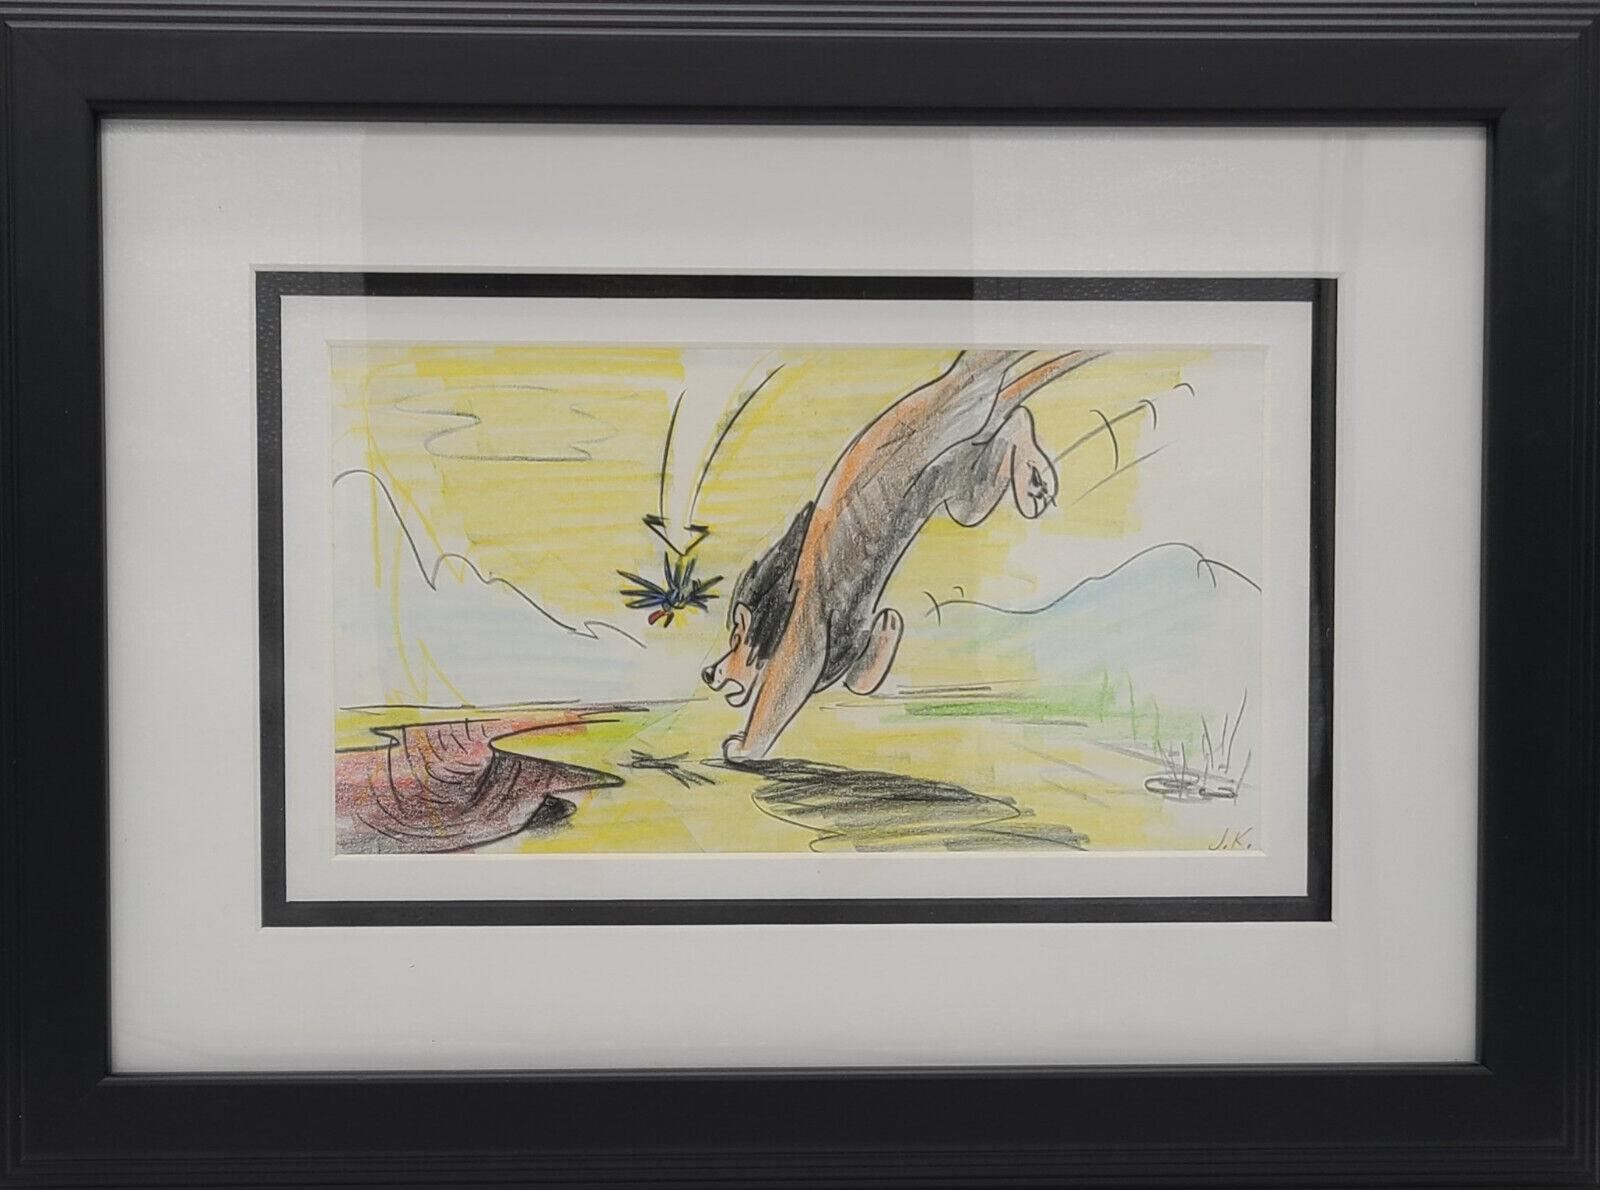 PRODUCTION: The Lion King, 1994  
MEDIUM: Storyboard
Image Size: 11'' x 6.5'' 
Frame Size: 17.25 x 12.75

ABOUT THE MEDIUM: Original Storyboard Drawings show what’s moving in each shot, and in which direction, so that the production team is crystal